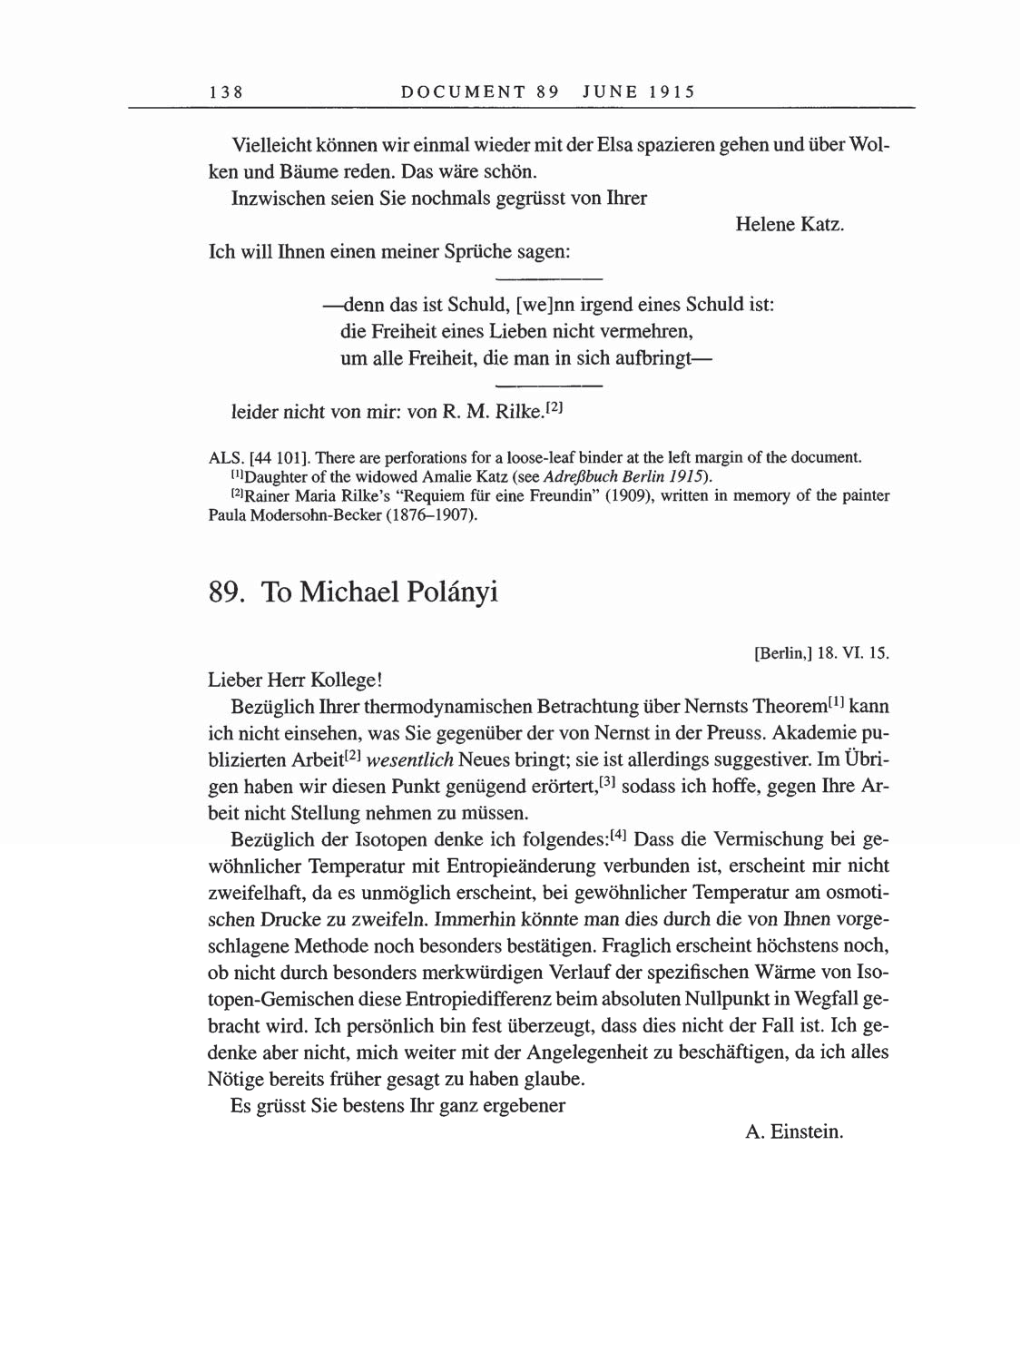 Volume 8, Part A: The Berlin Years: Correspondence 1914-1917 page 138